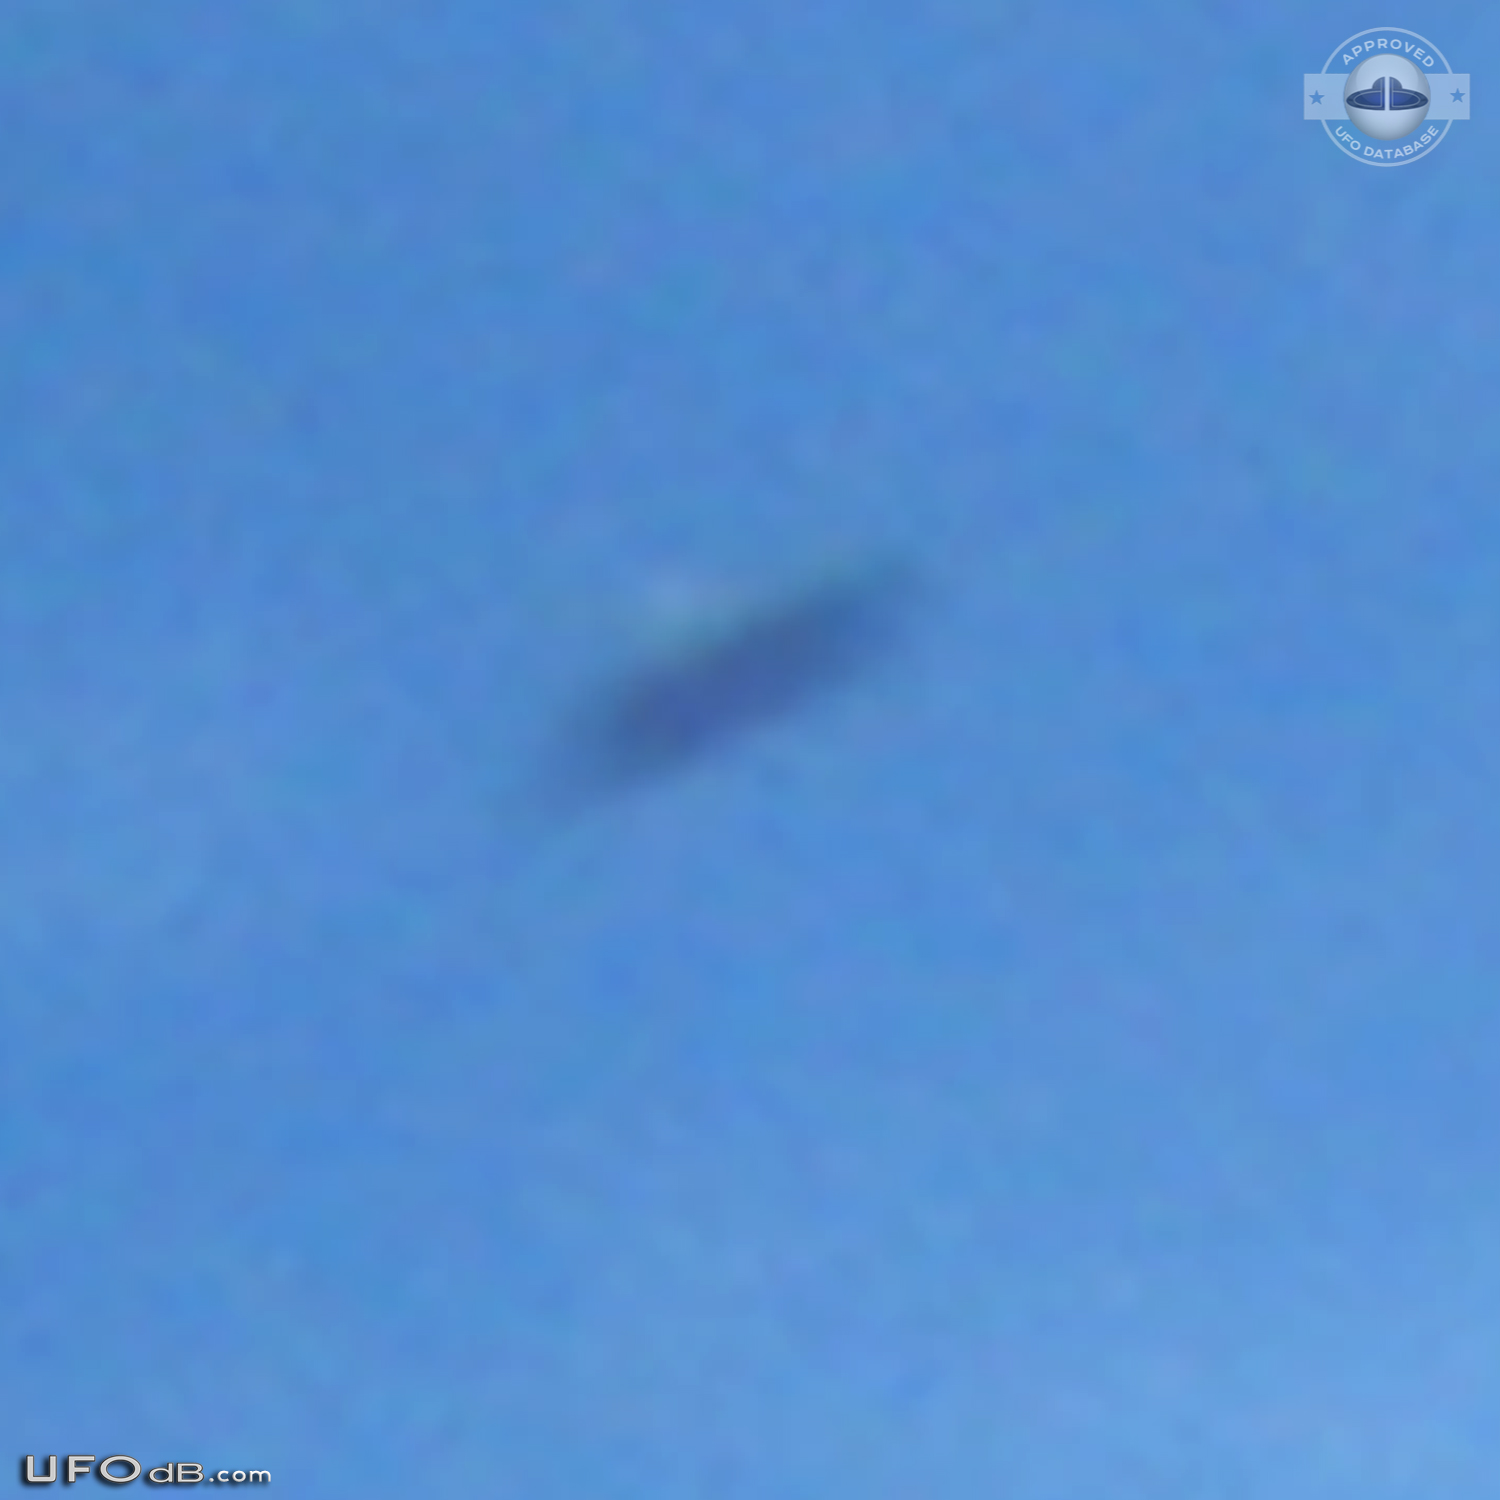 Picture of Graffiti on wall captures UFO in the sky in Cumbaya Ecuador UFO Picture #552-5